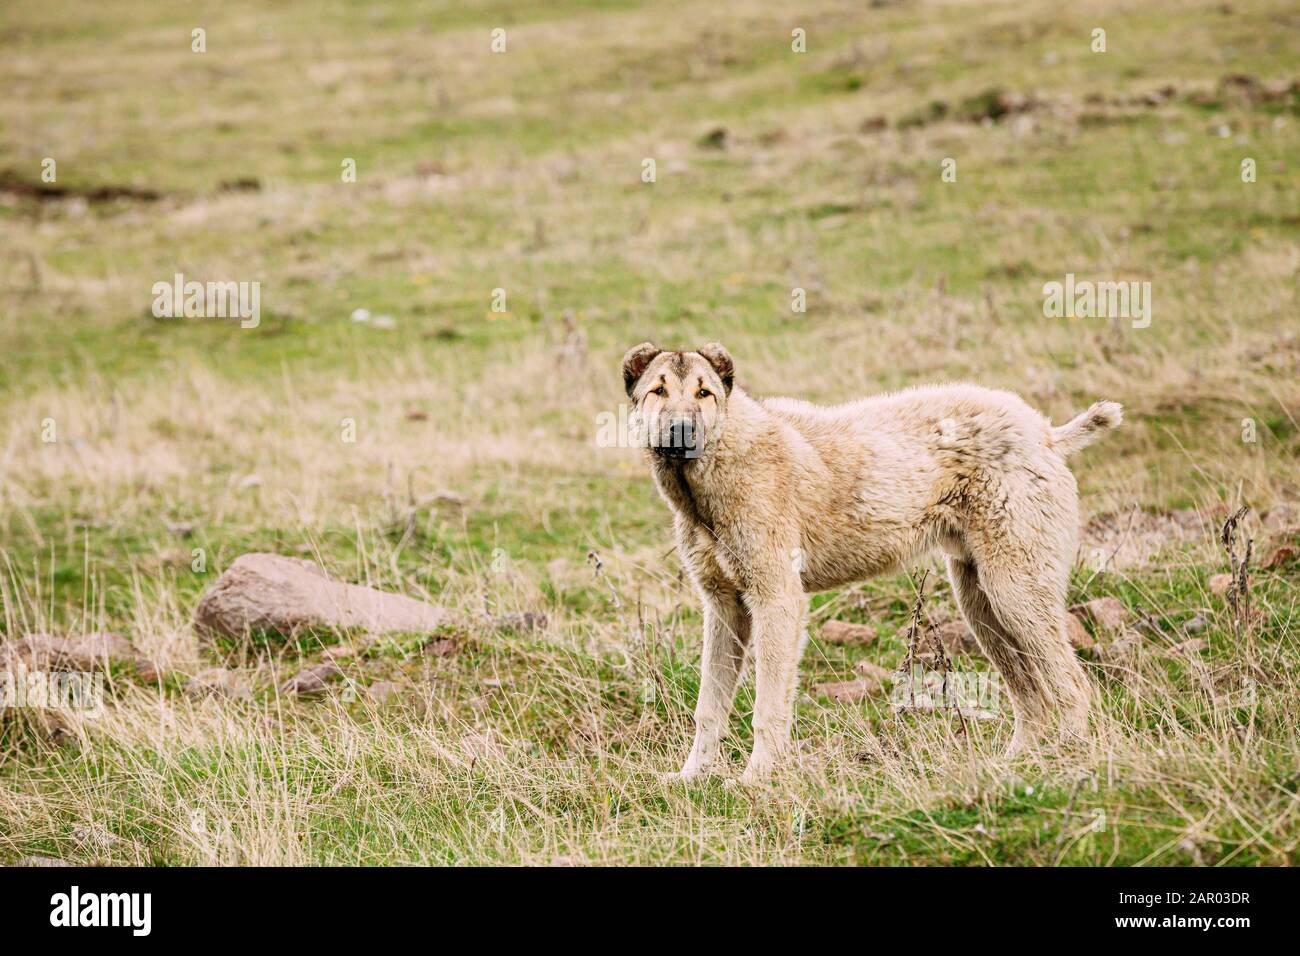 Central Asian Shepherd Dog Tending Sheep In Mountains Of Georgia. Alabai -An Ancient Breed From The Regions Of Central Asia. Used As Shepherds, As Wel Stock Photo